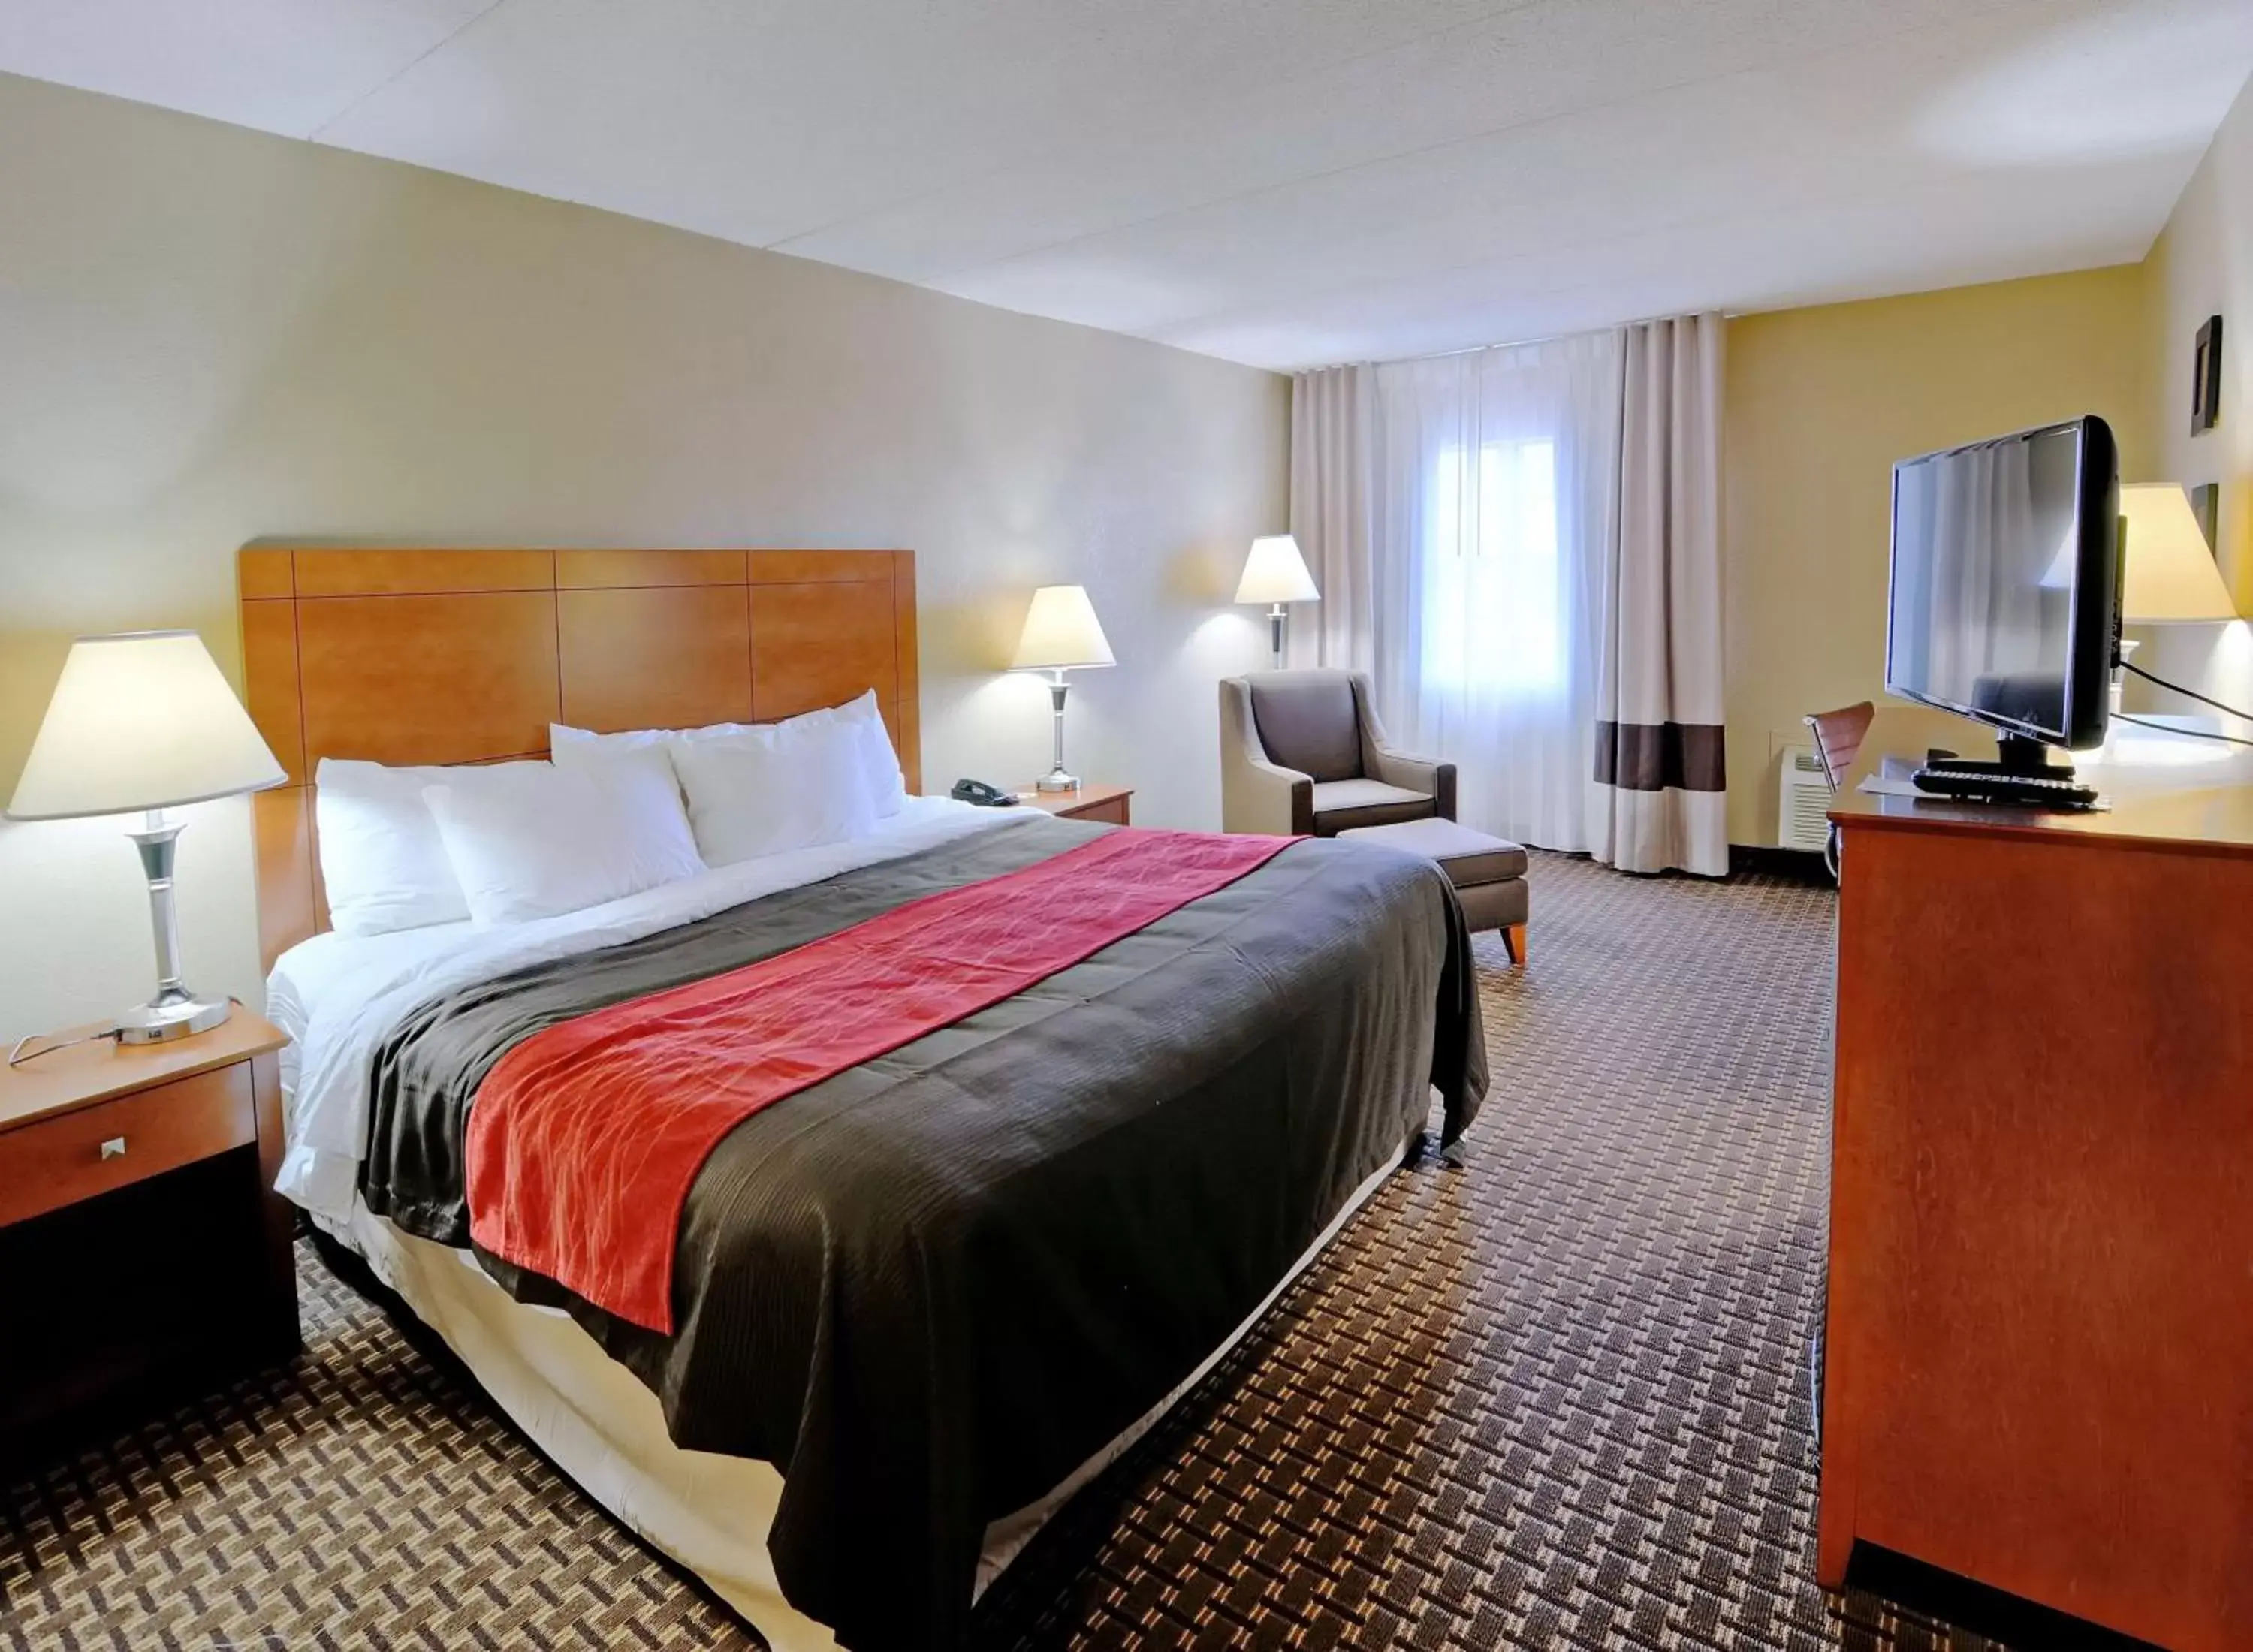 Standard King Room - Non-Smoking  in Comfort Inn & Suites Raphine - Lexington near I-81 and I-64